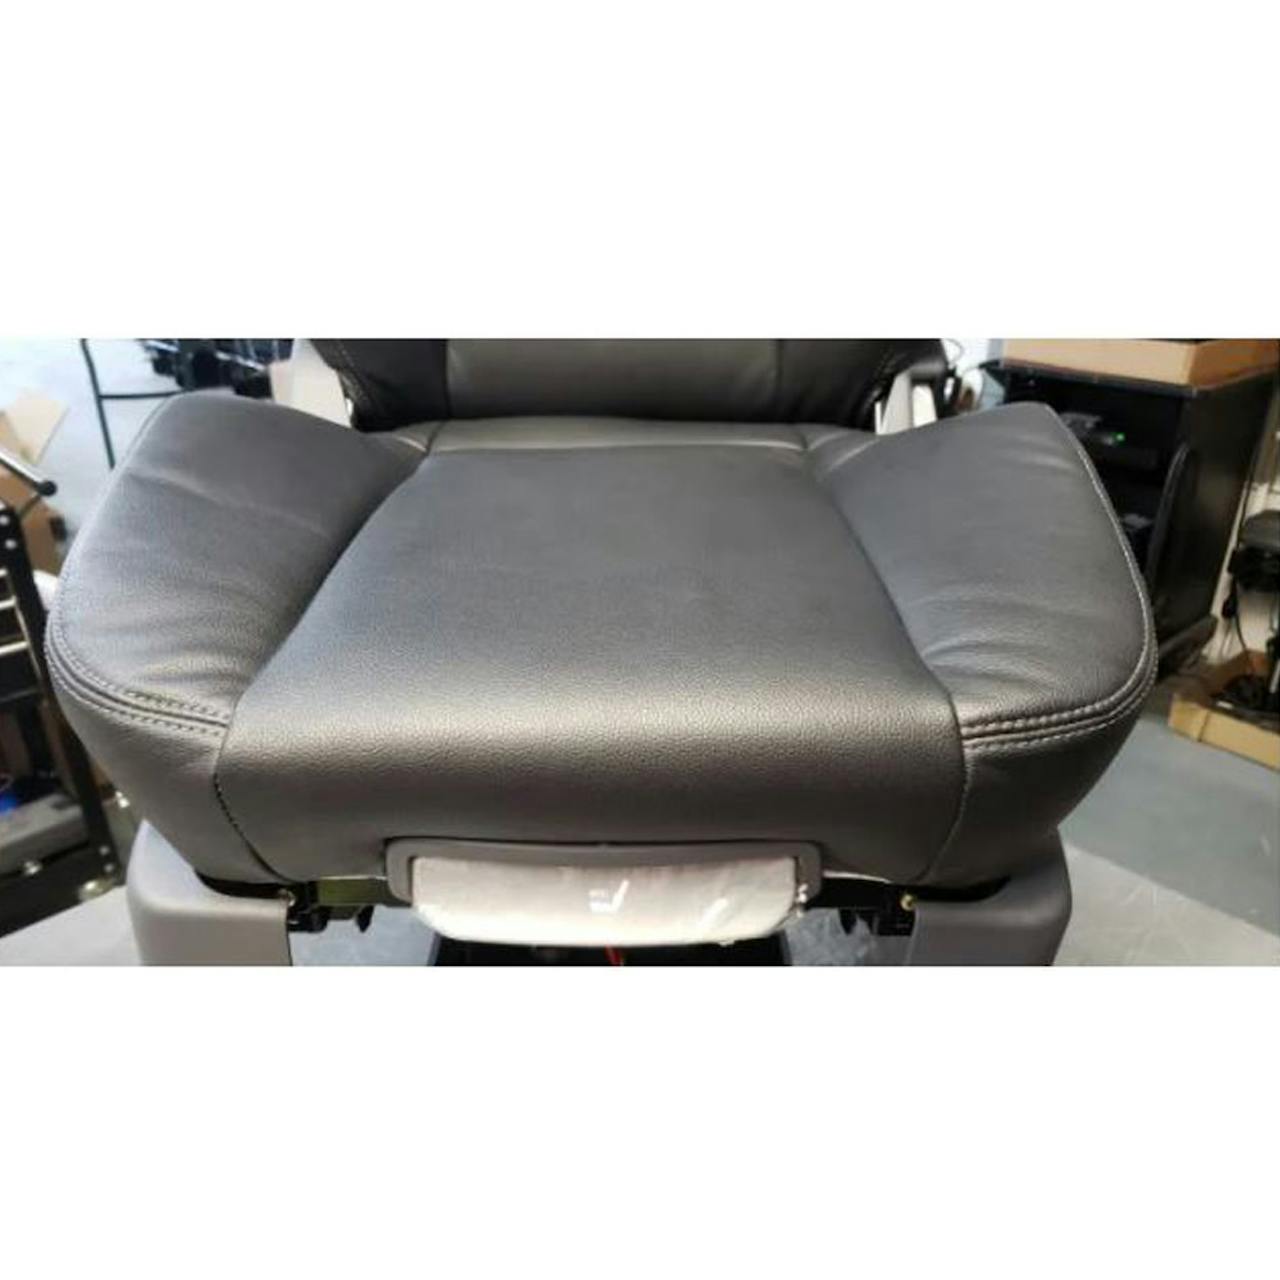 Prime TC300 Series Air Ride Suspension Genuine Leather Truck Seat With Arm  Rests